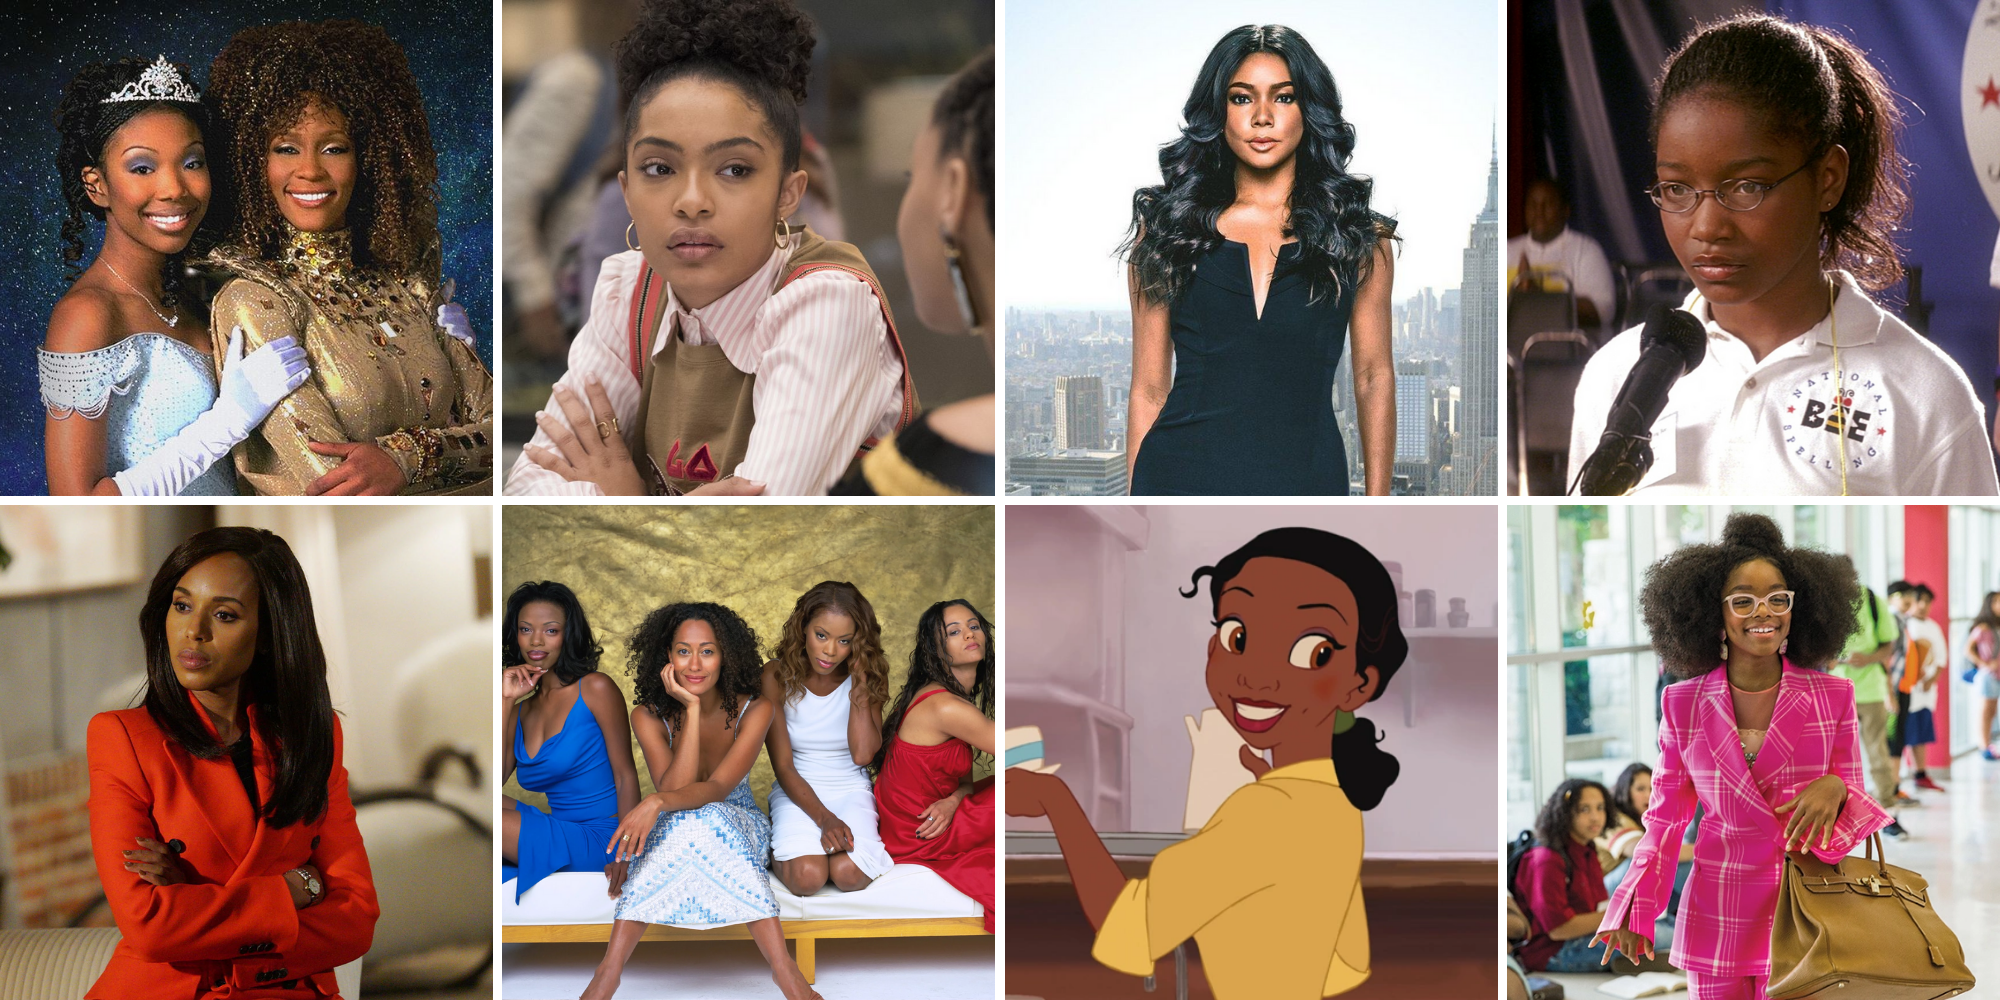 Shows and movies to watch that center Black women